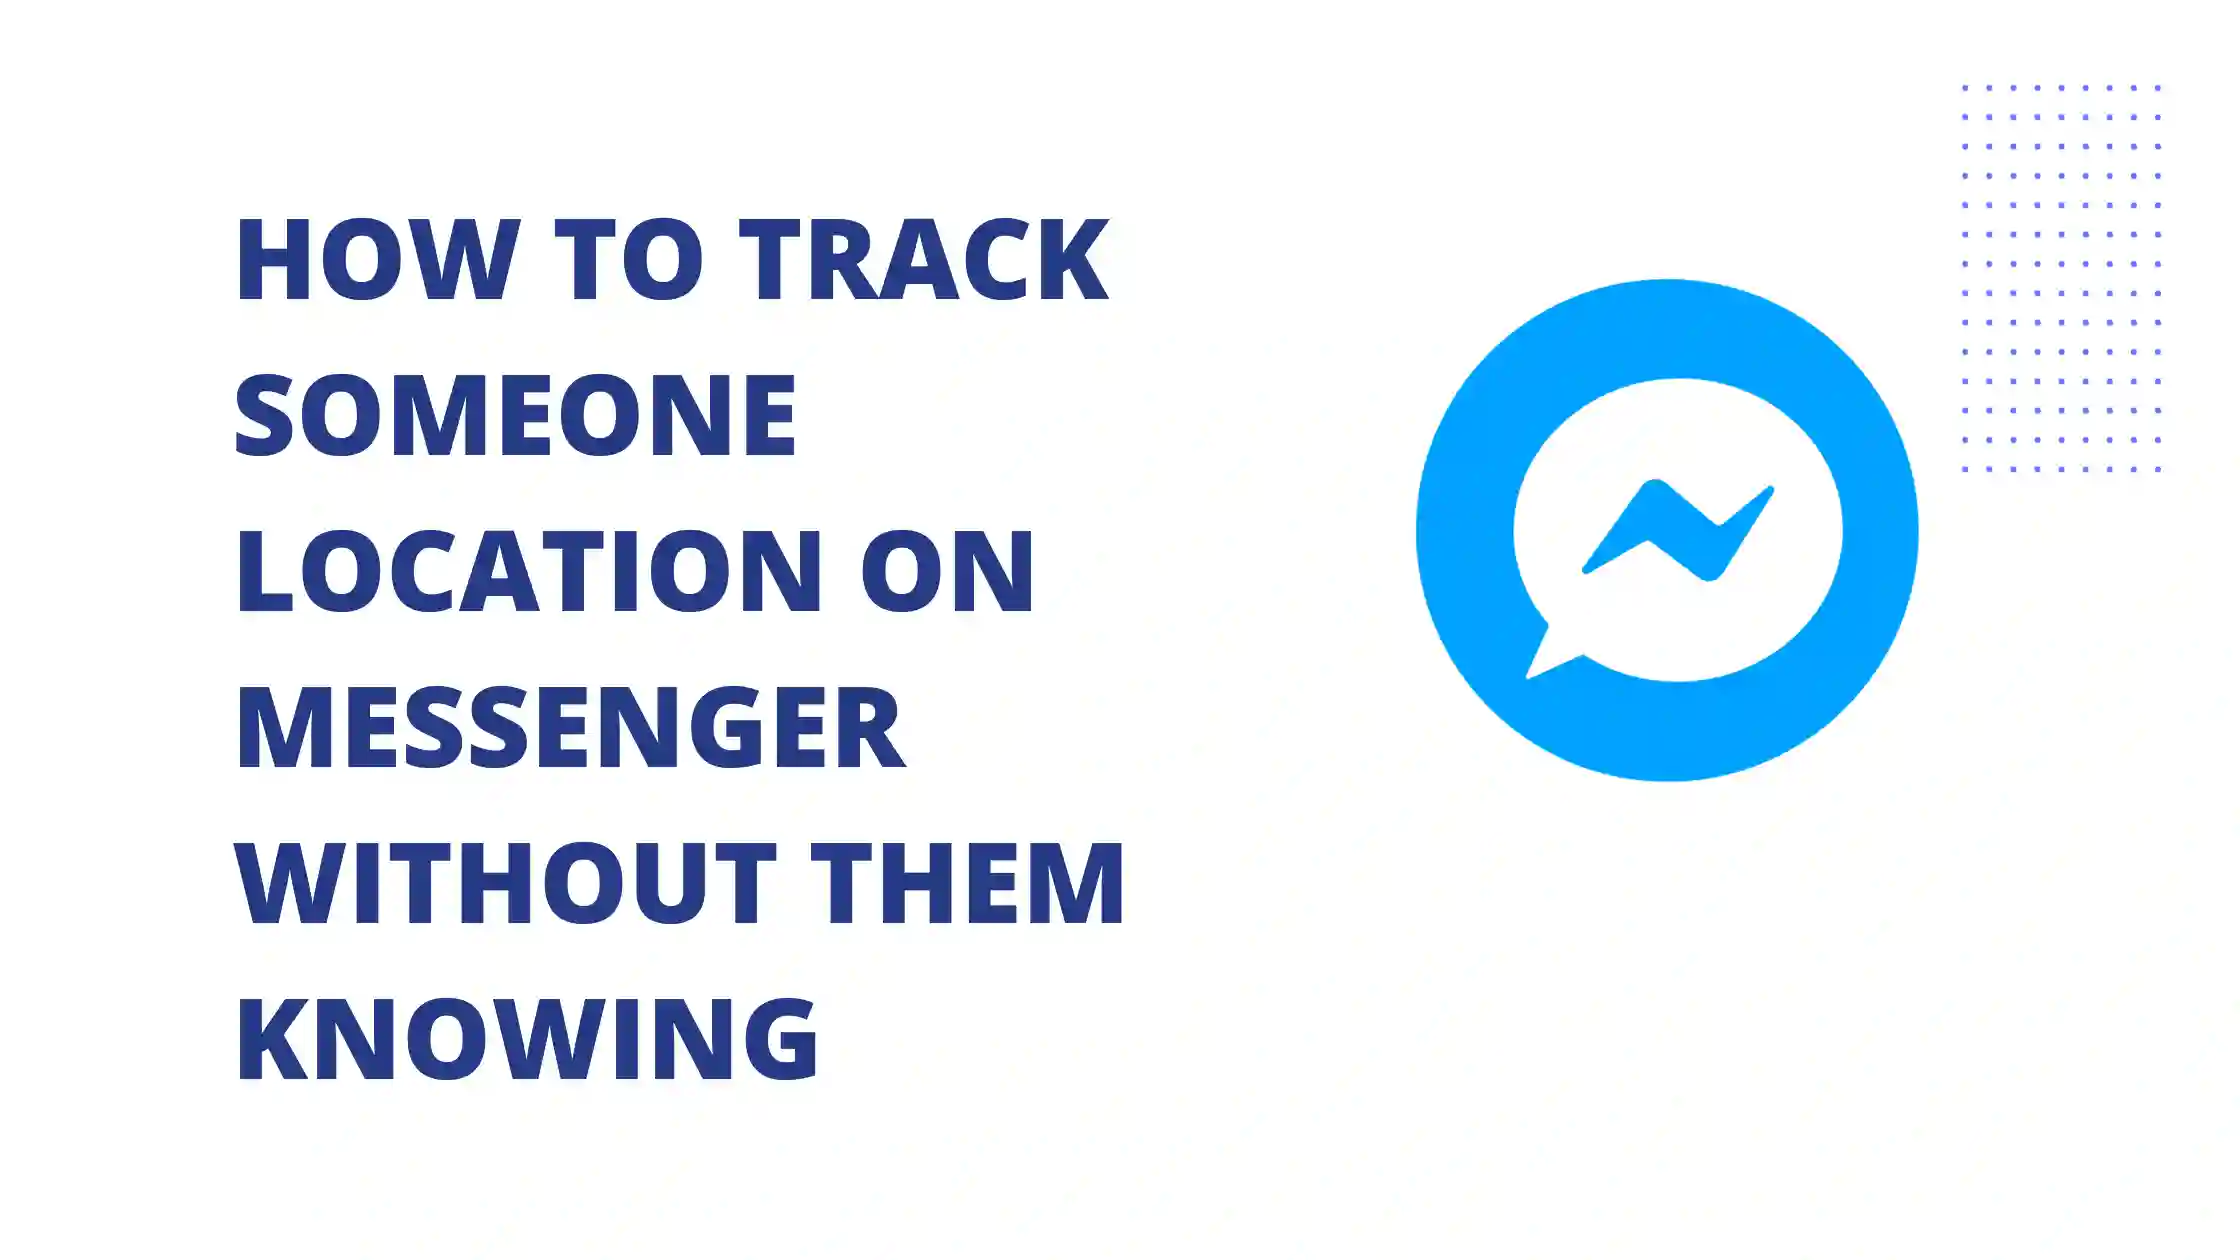 How to Track Someone Location on Messenger Without Them Knowing